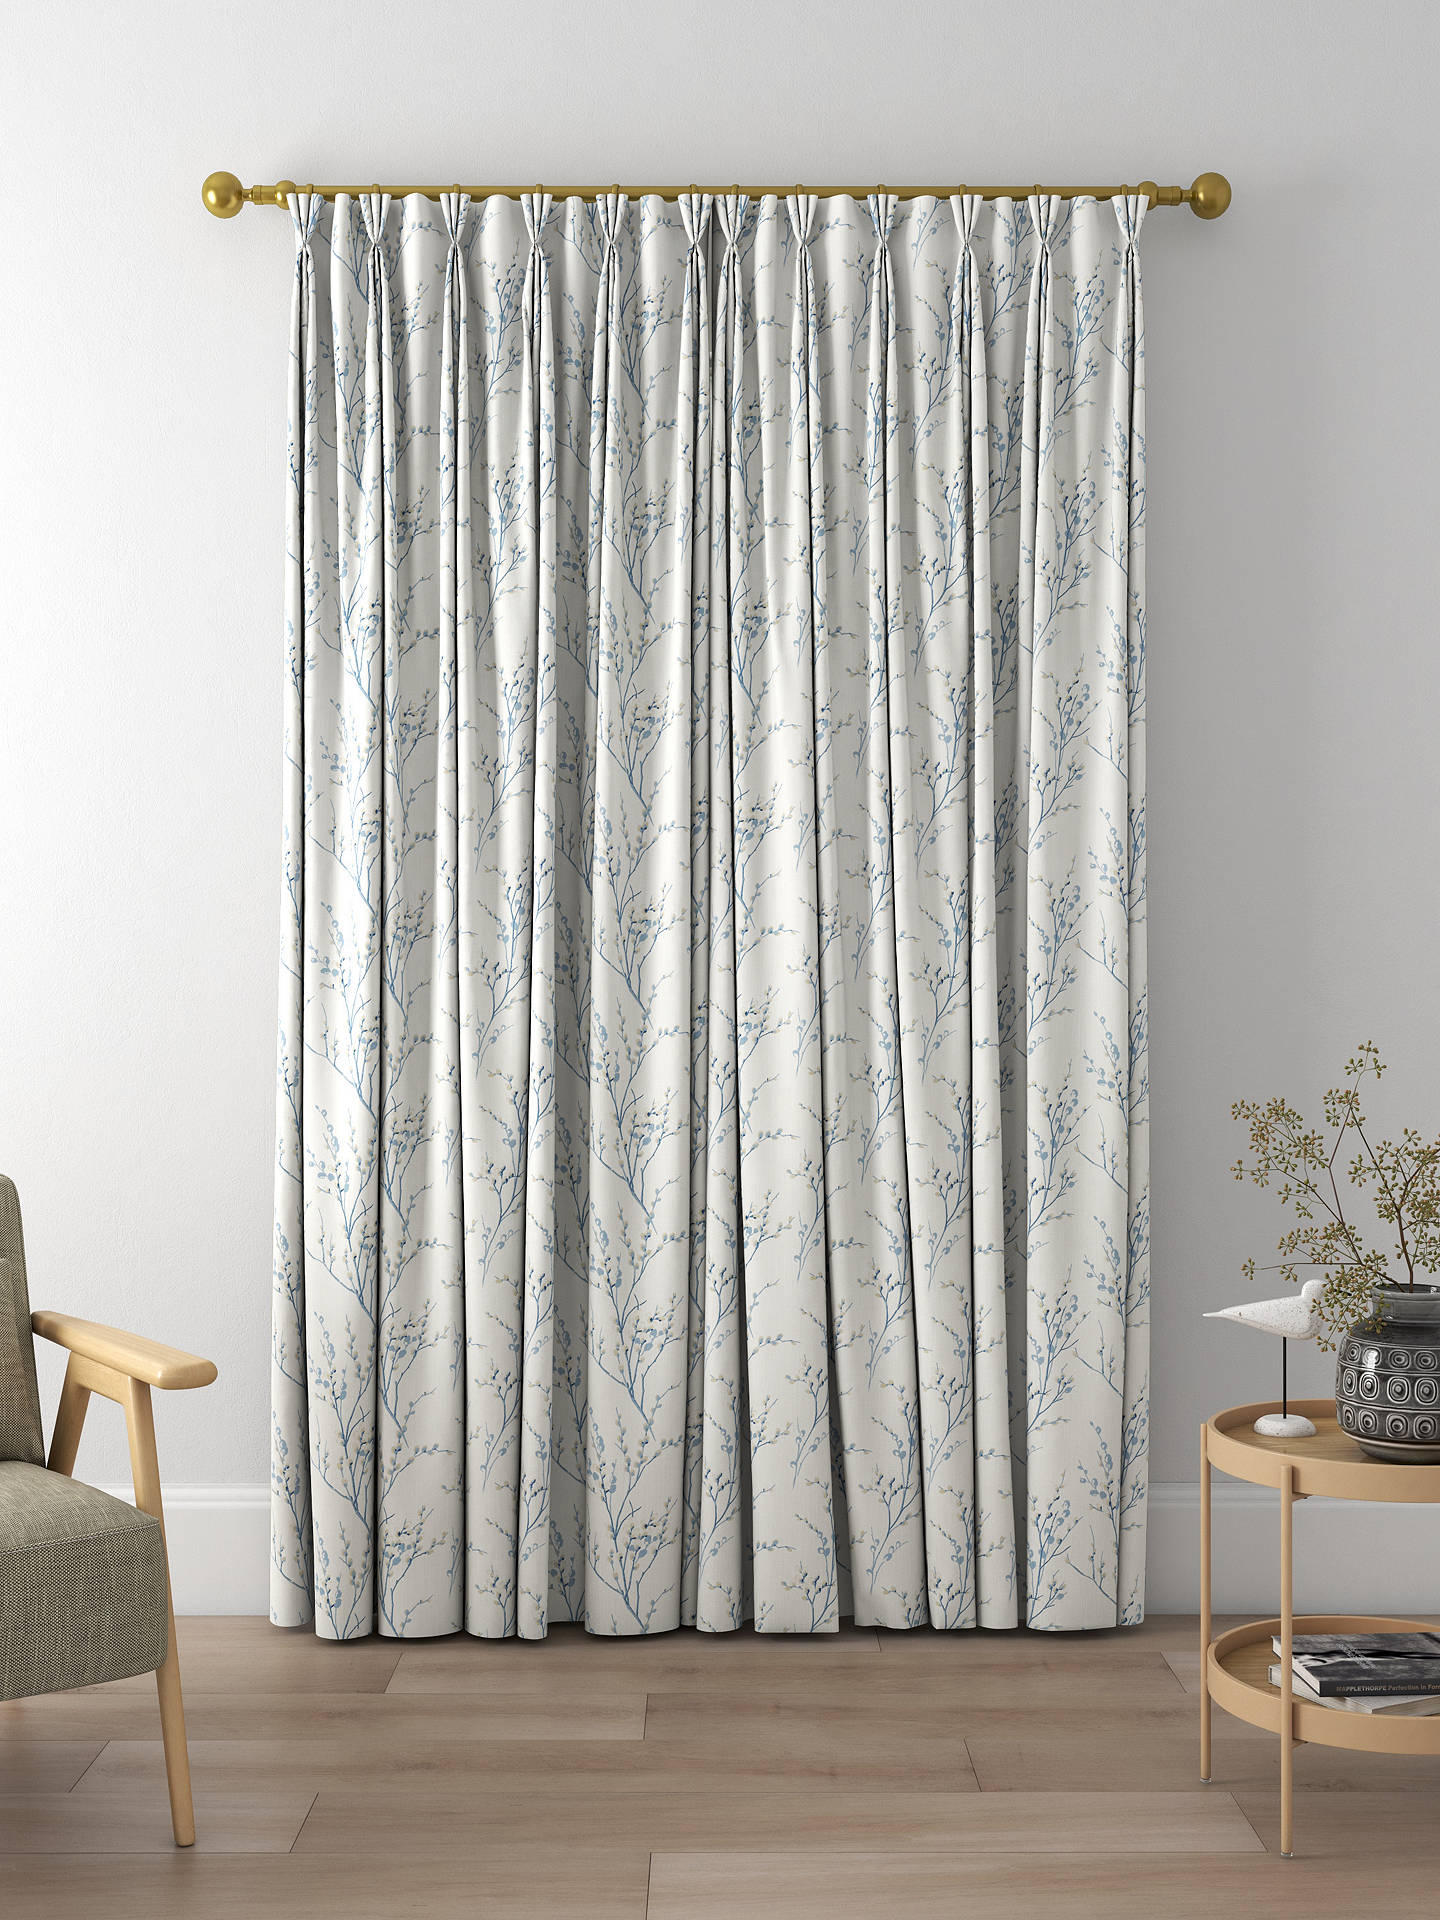 Laura Ashley Pussy Willow Made to Measure Curtains, Off White/Seaspray